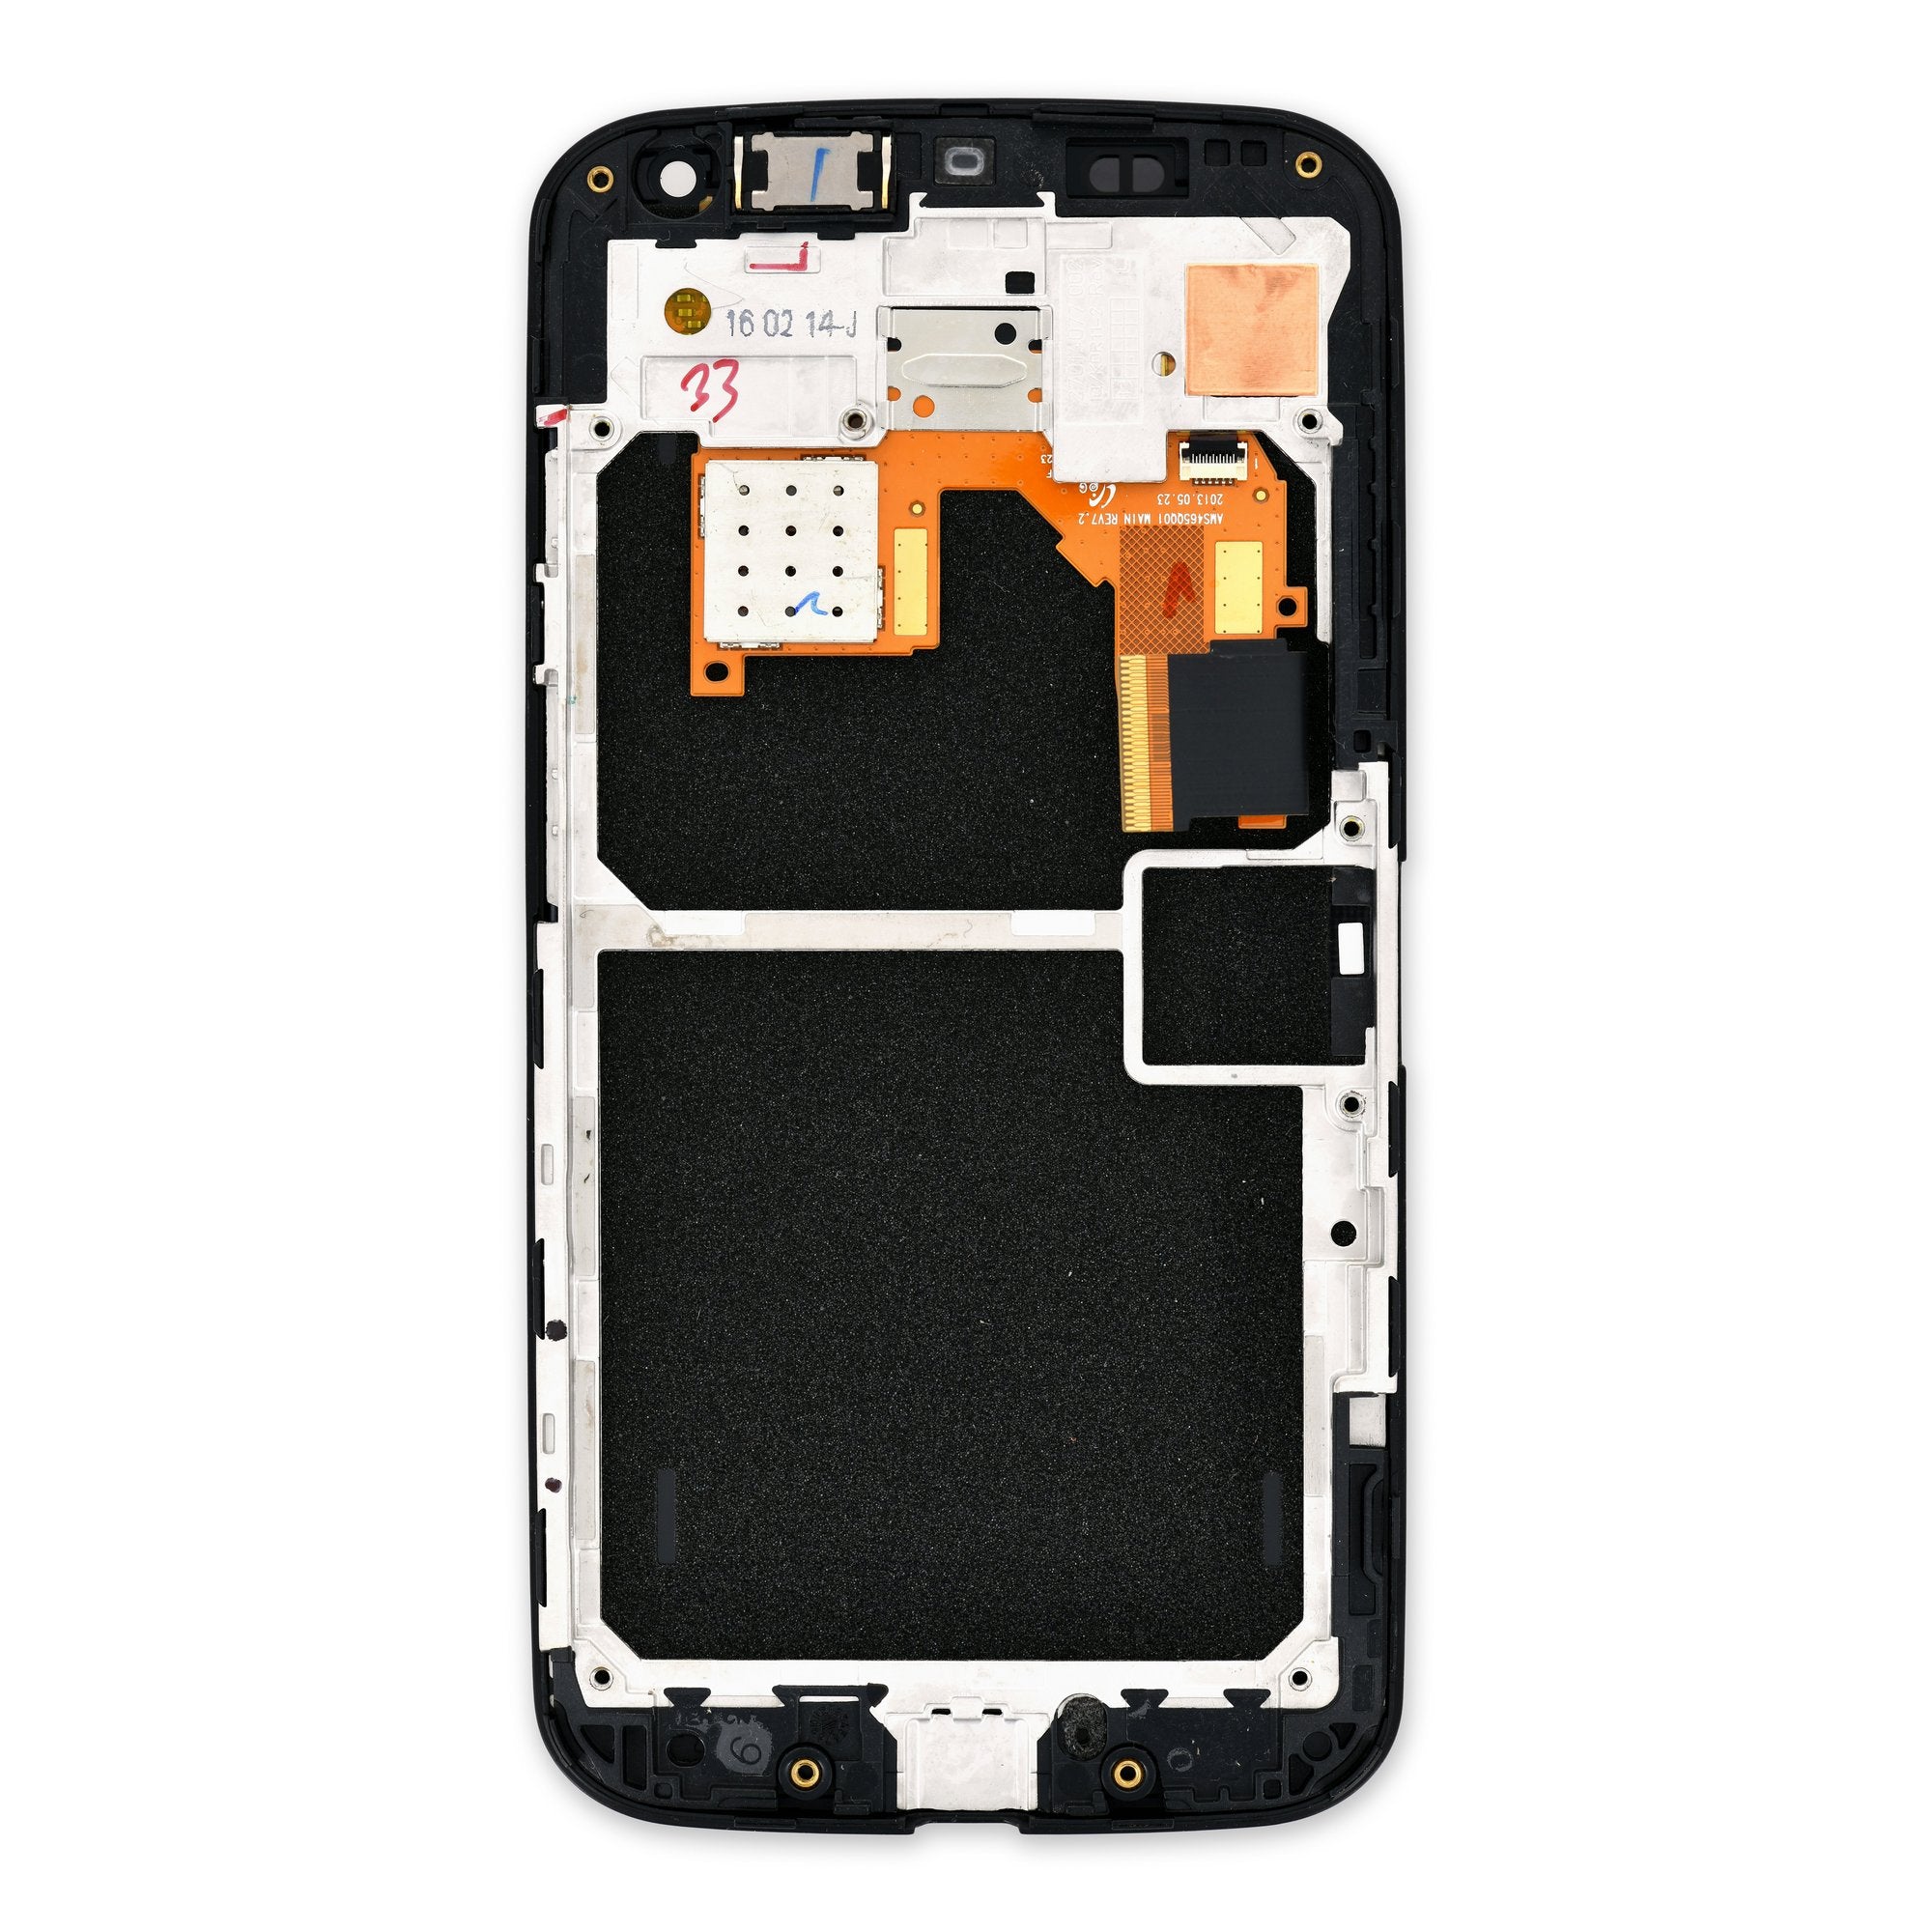 Moto X (US Cellular) Screen Assembly - Genuine New